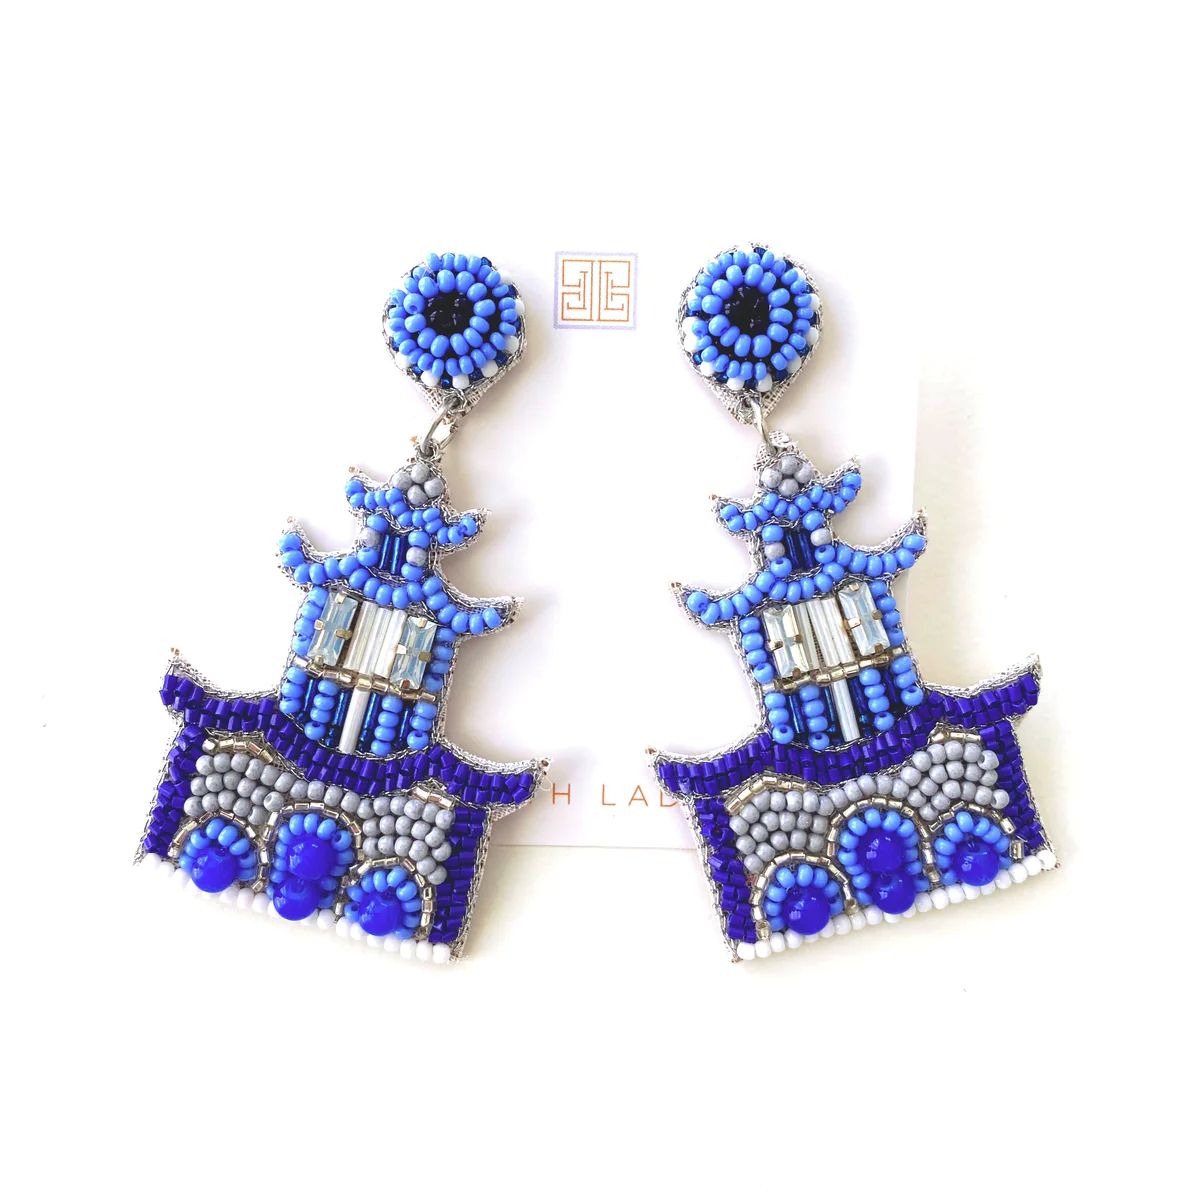 Blue Pagoda Earrings | Beth Ladd Collections